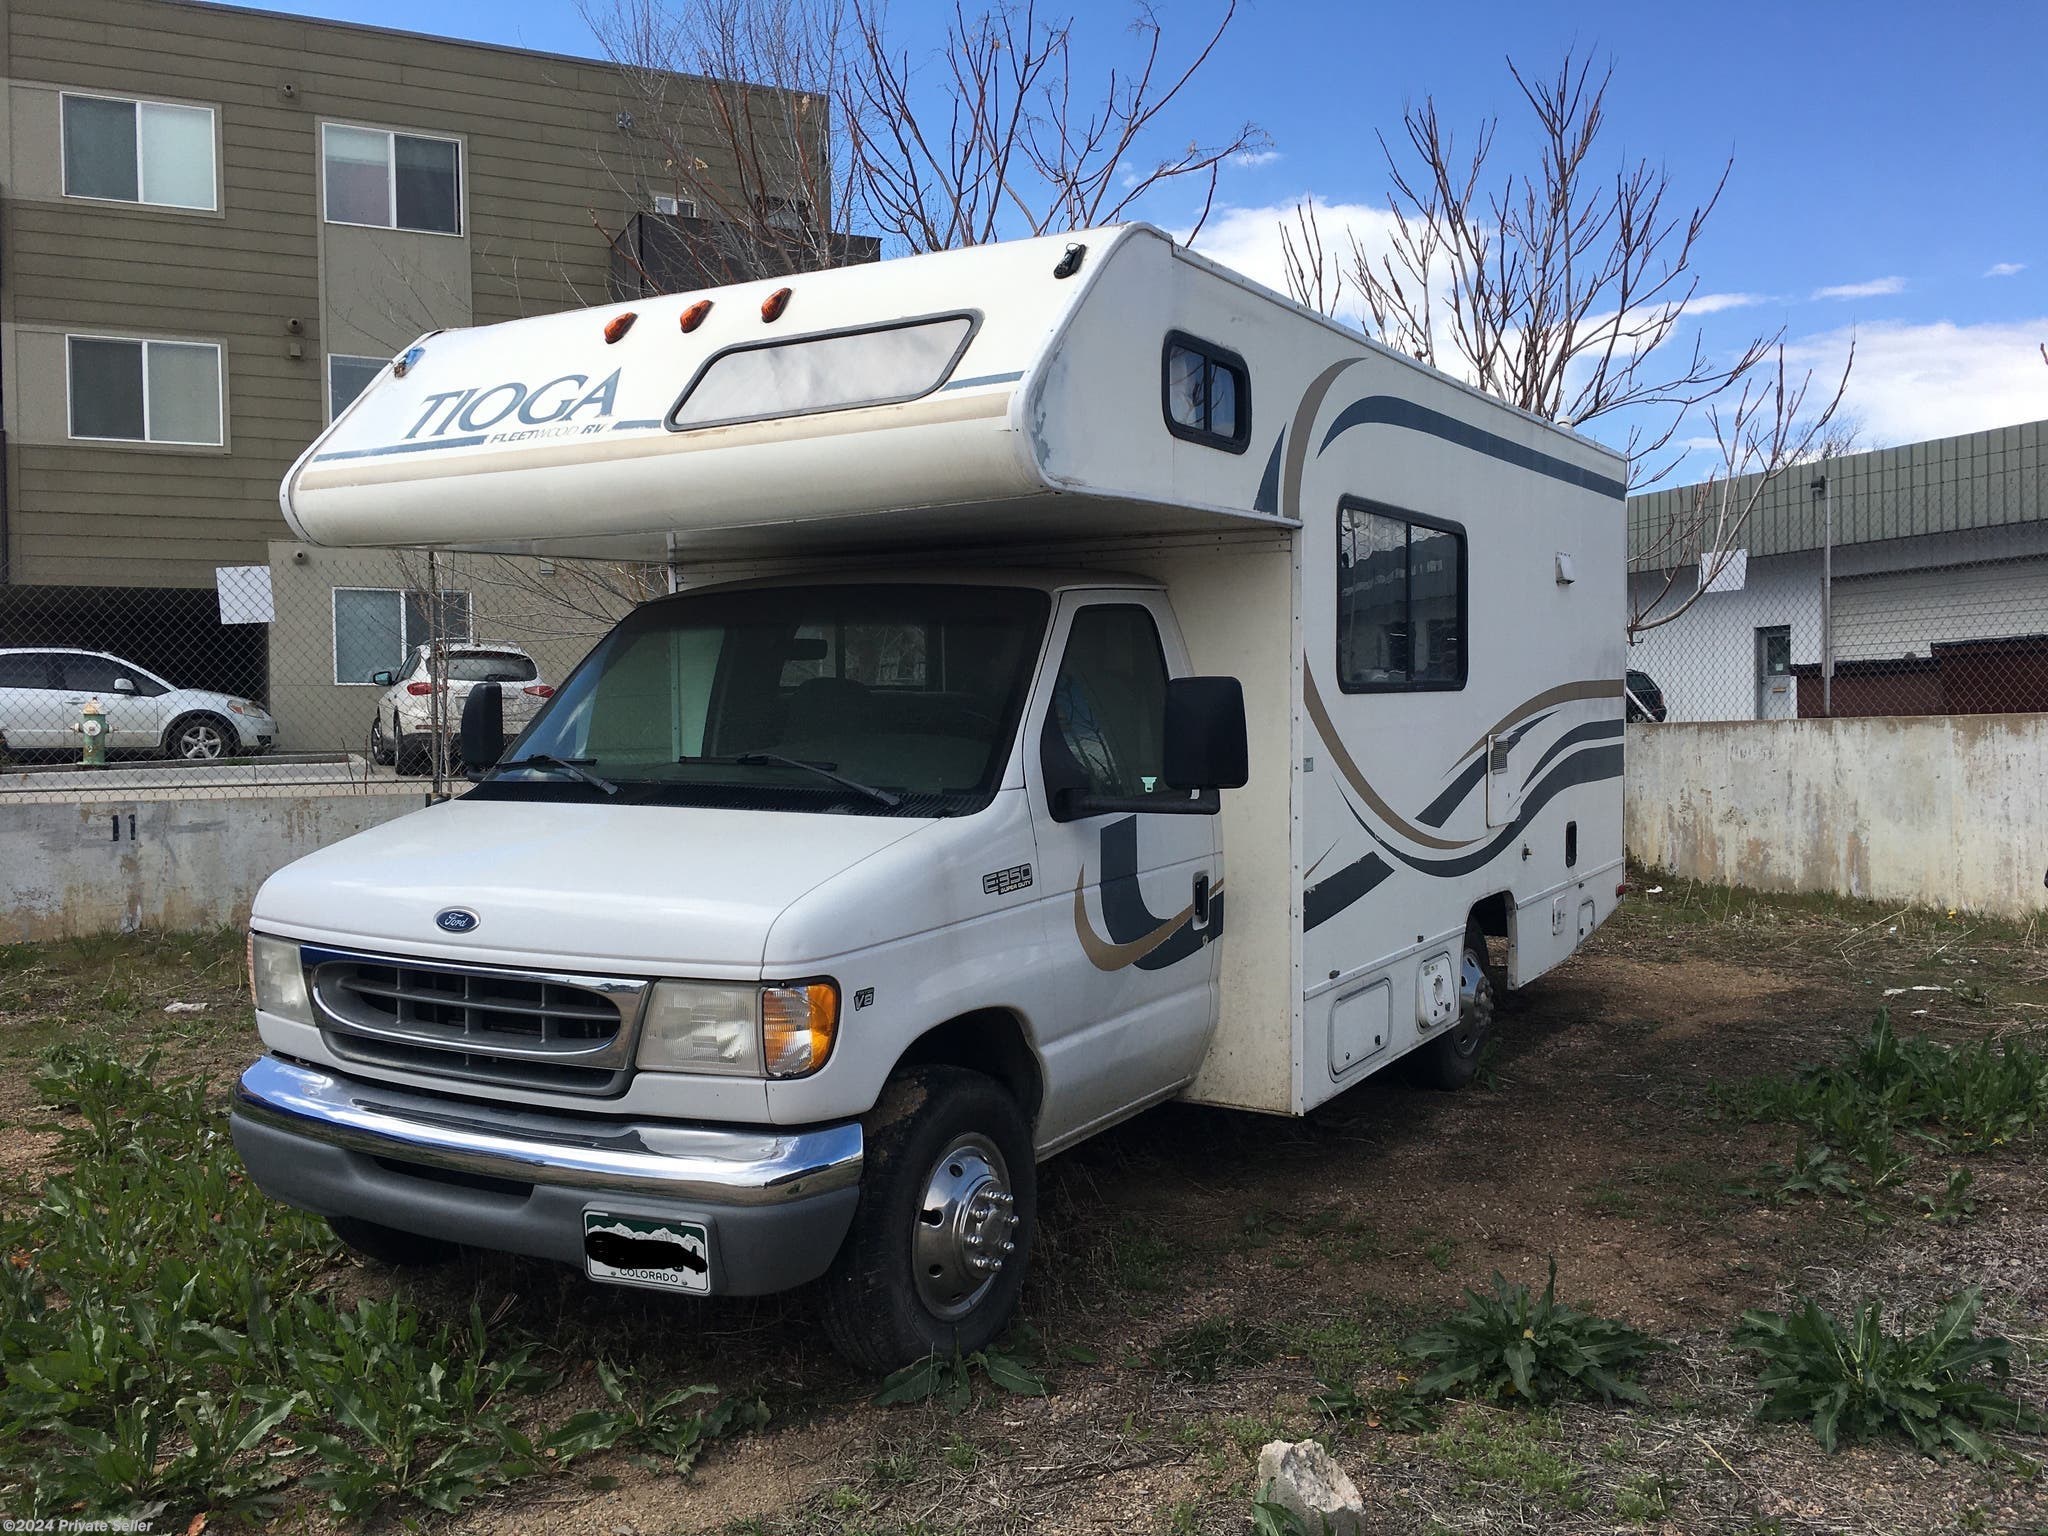 1999 Ford Tioga Motorhome For Sale